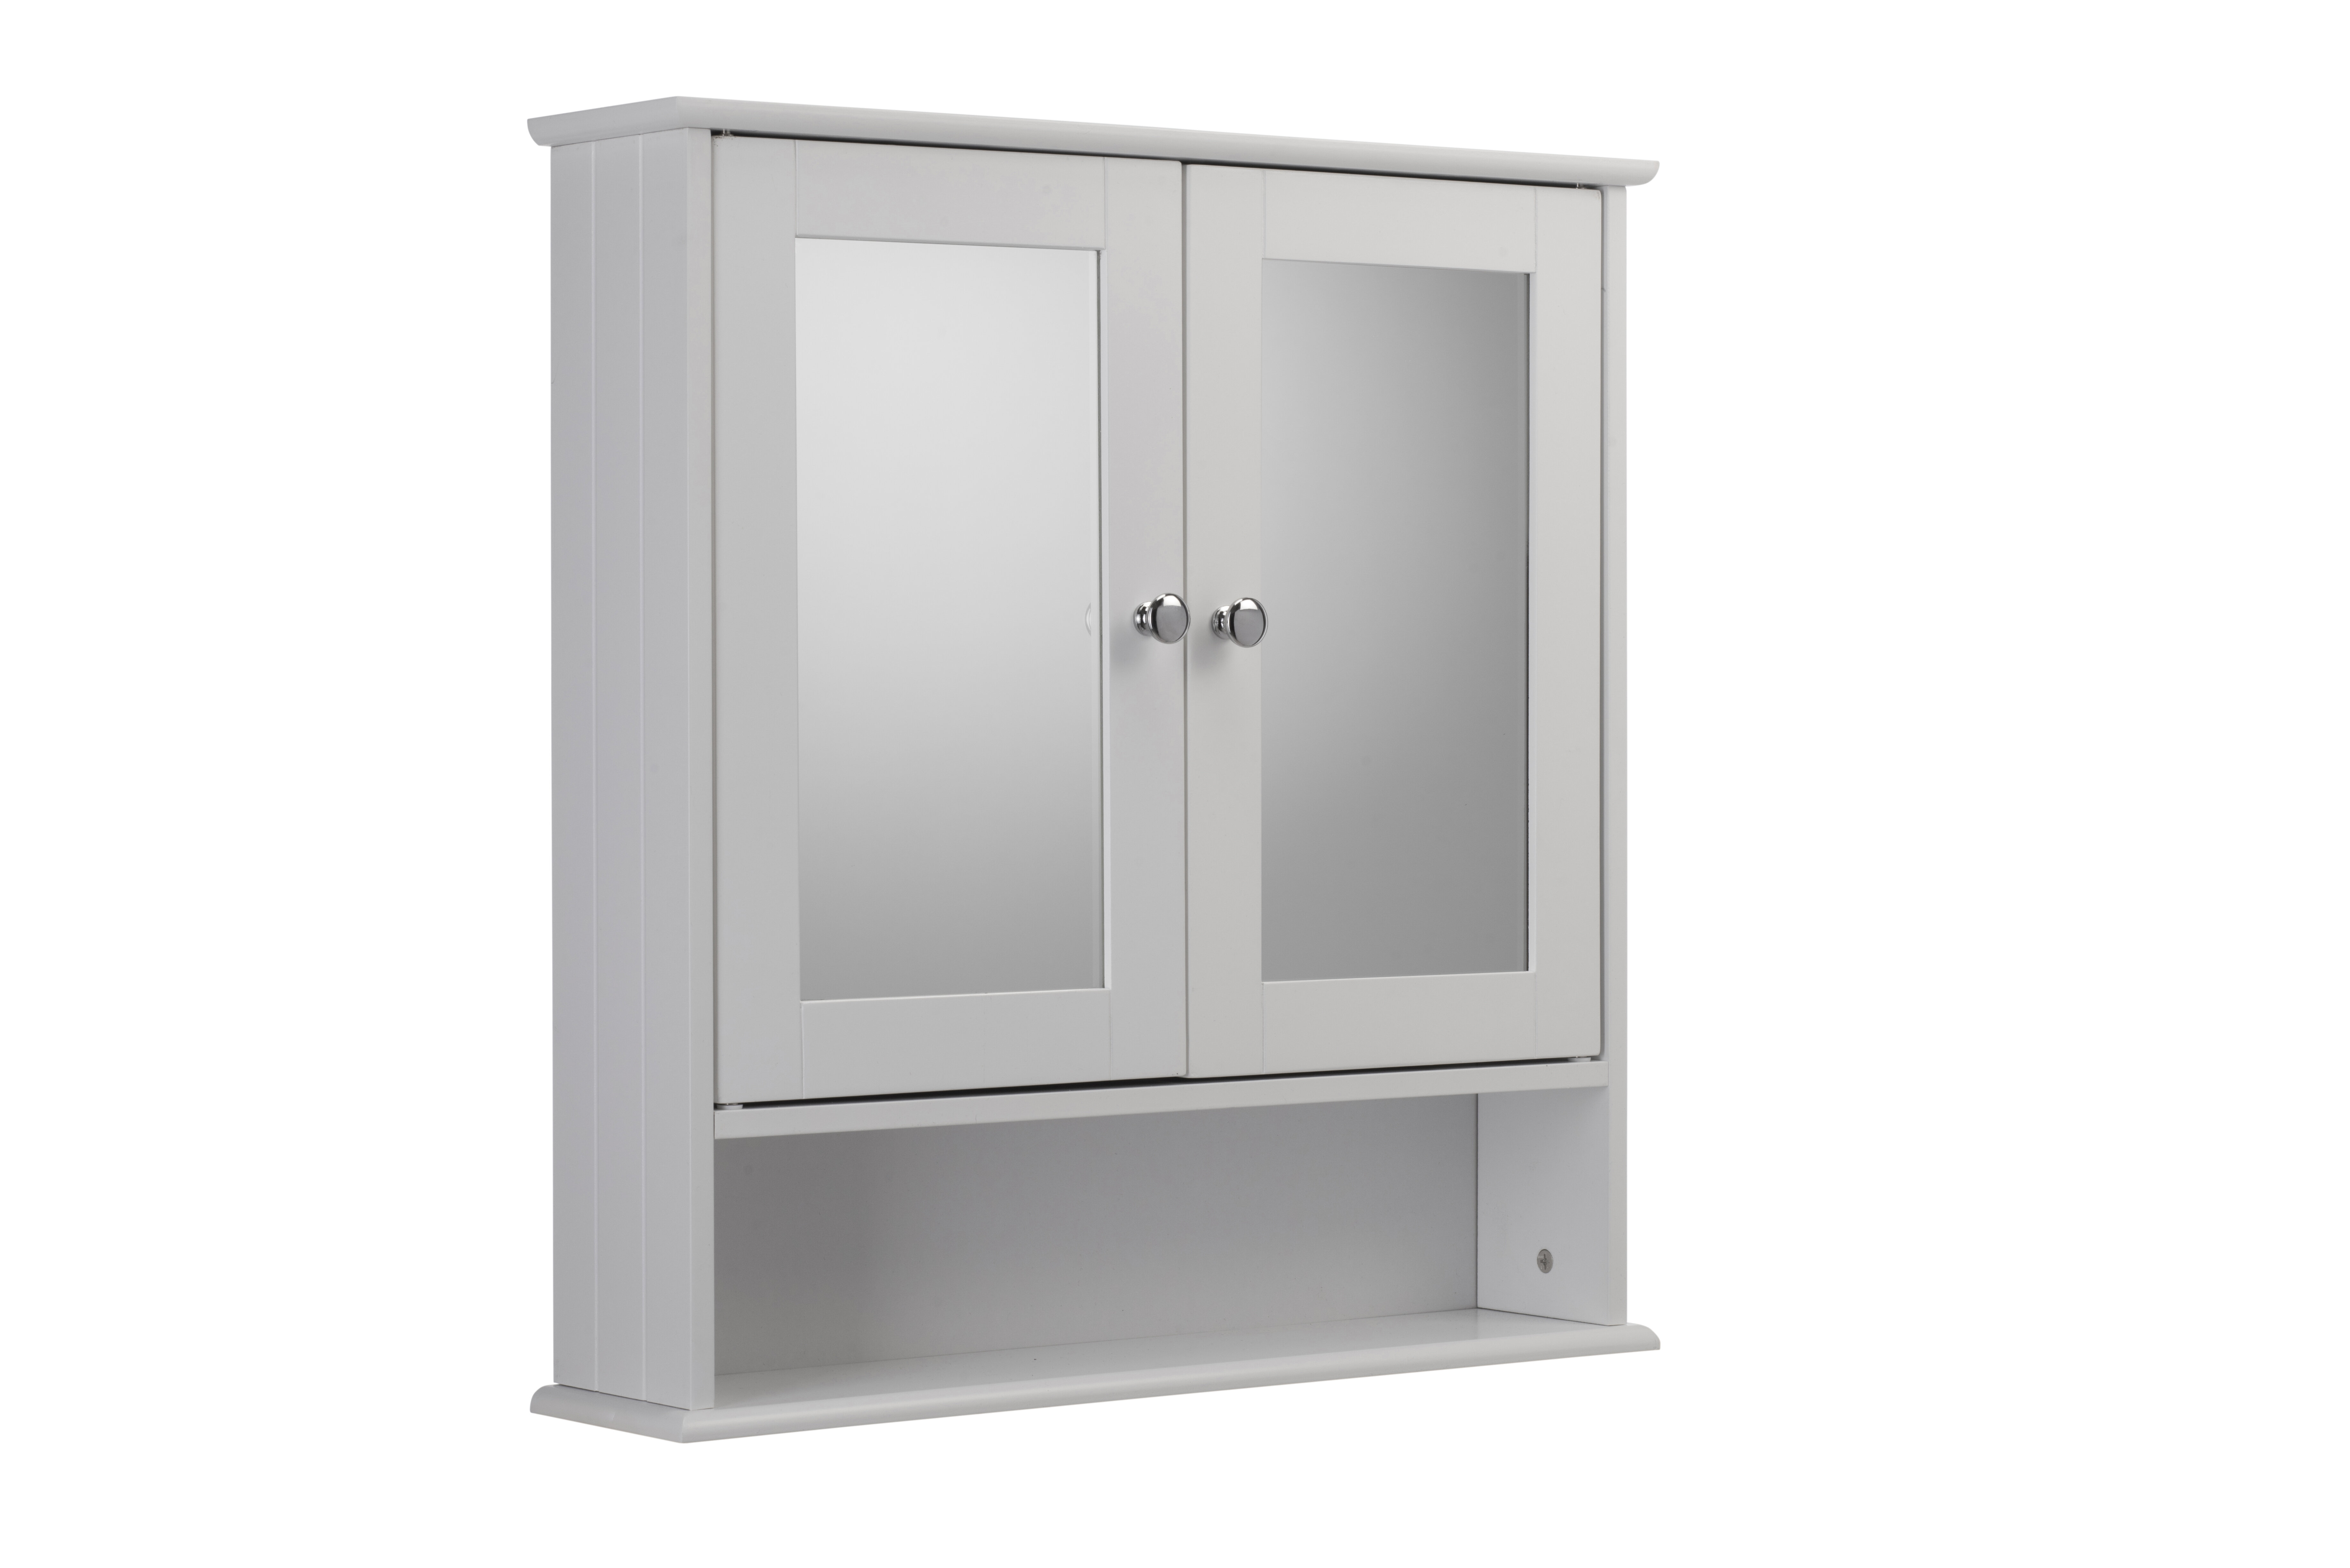 Croydex Anderson Double Door Mirror White wooden Cabinet with Fixed Open Shelf and Hang N Lock Fitting System 